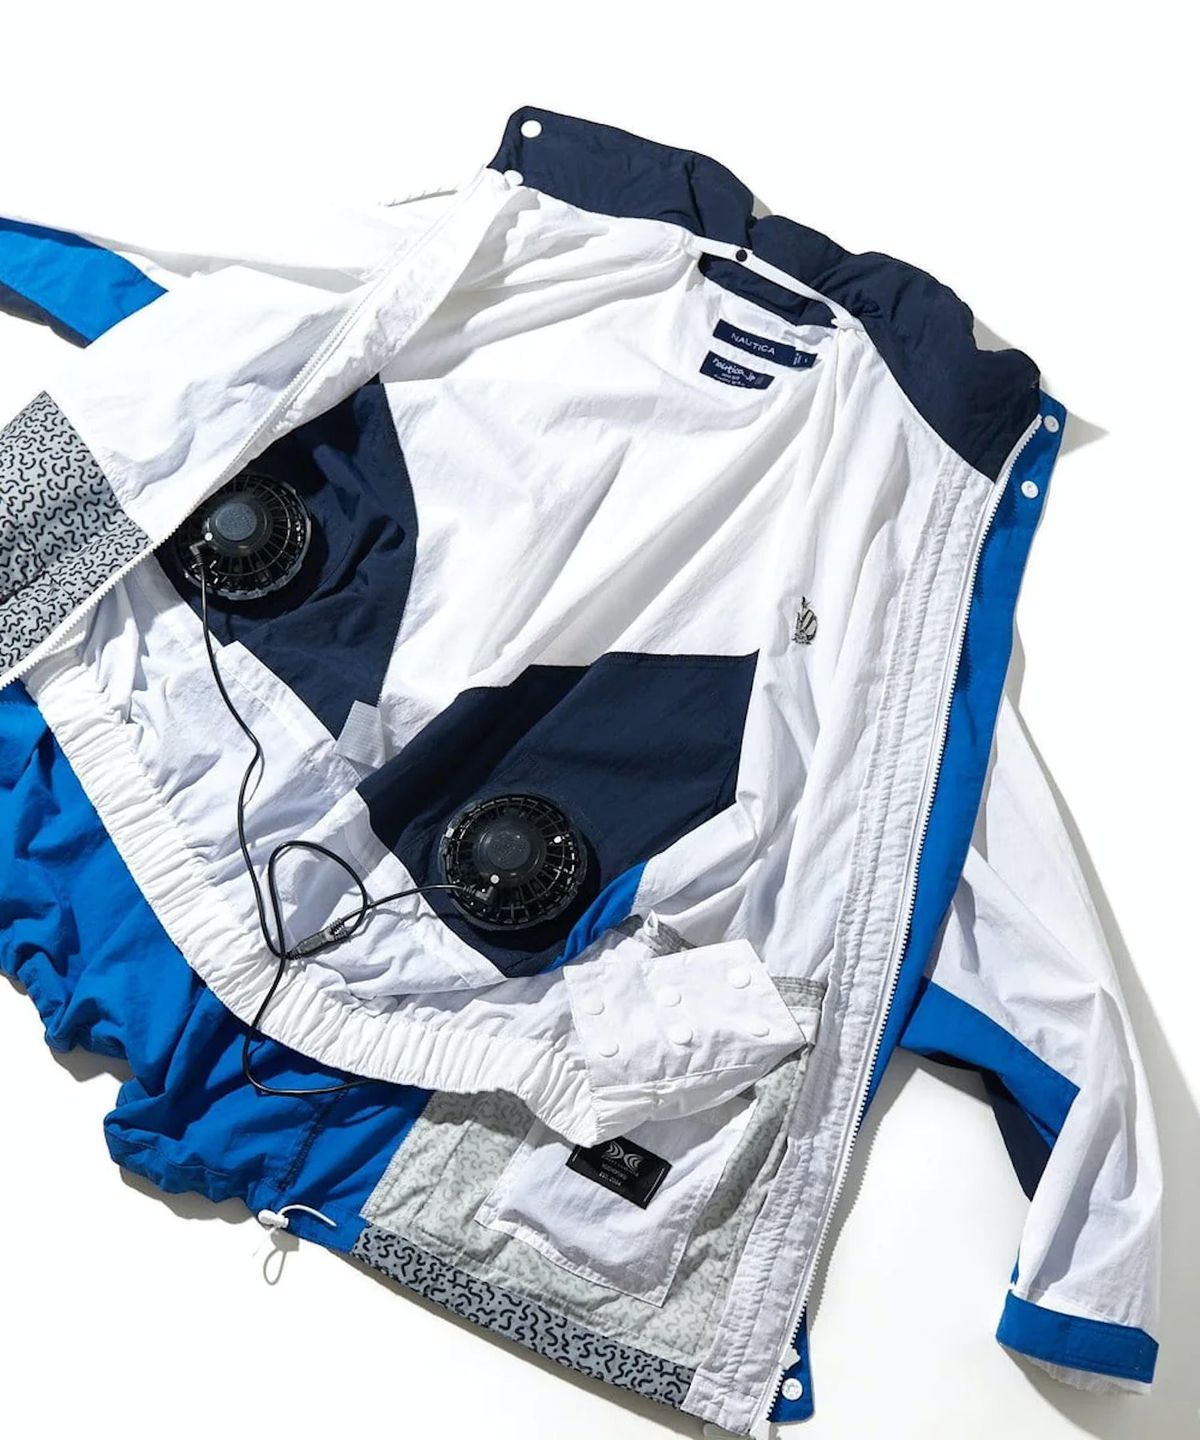 Cooling jacket from Nautica Japan.